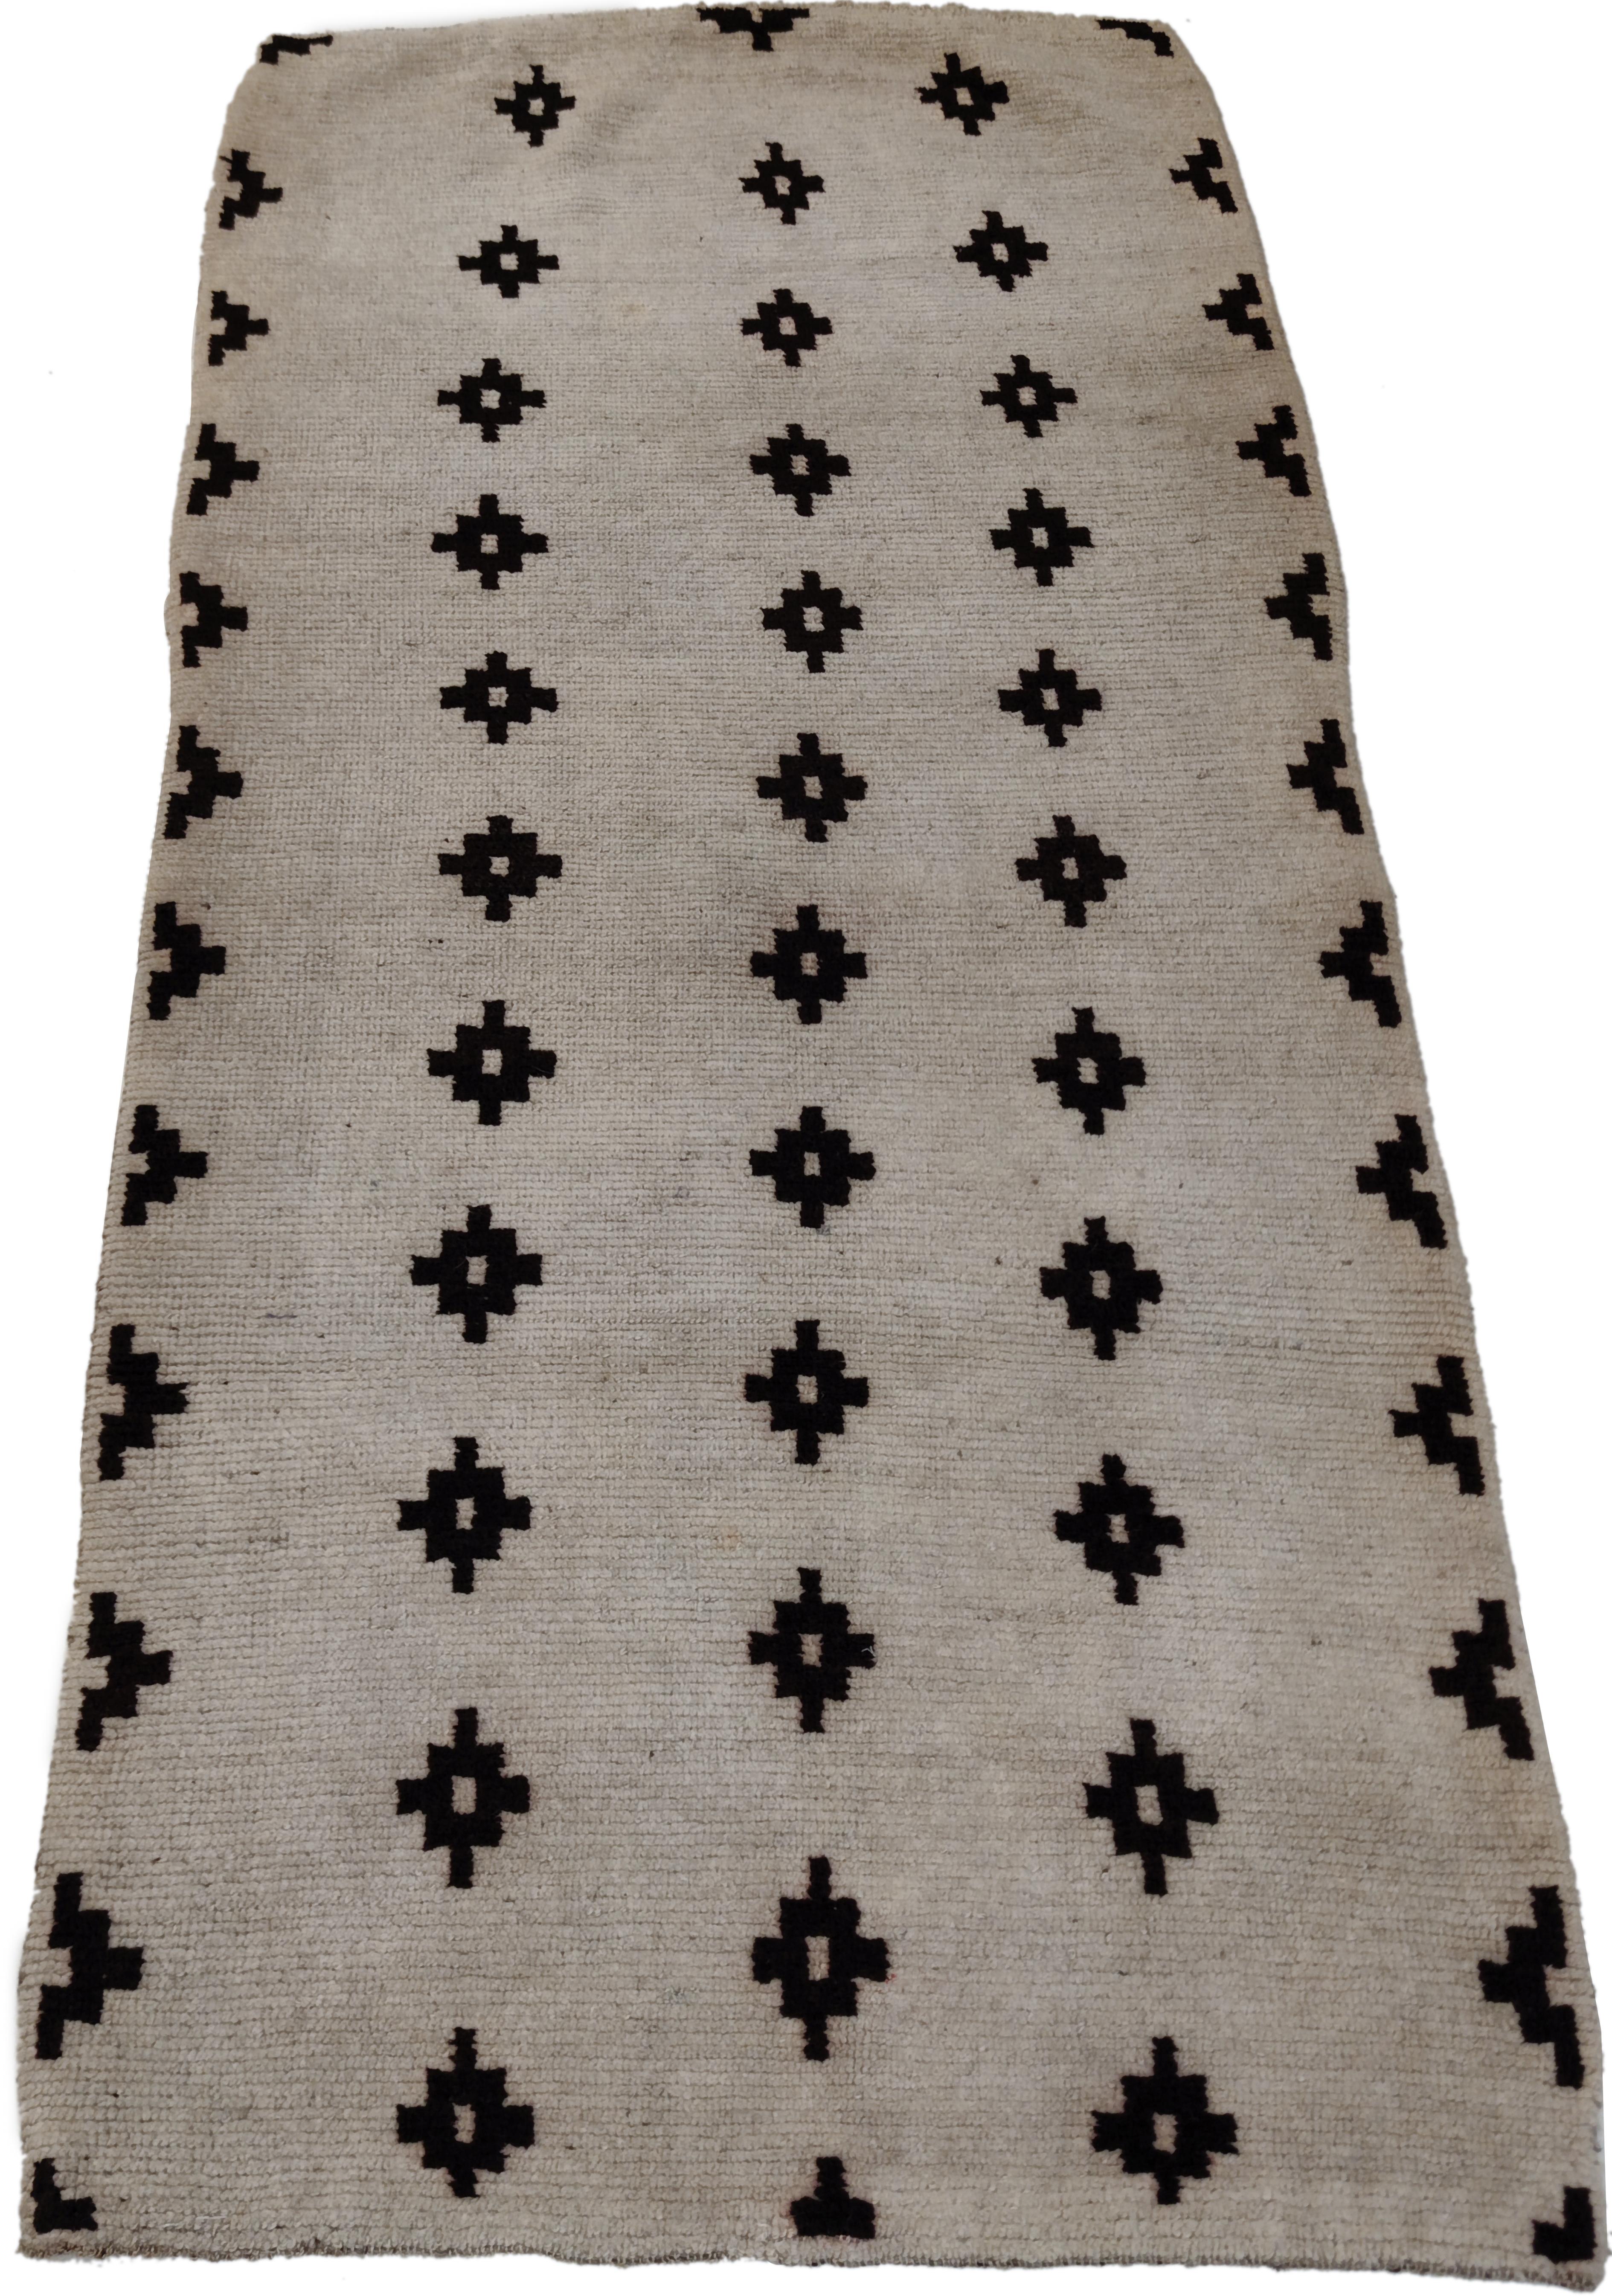 Hand-Knotted Antique White Ground Tibetan Khaden Rug with Black Stepped Diamonds For Sale